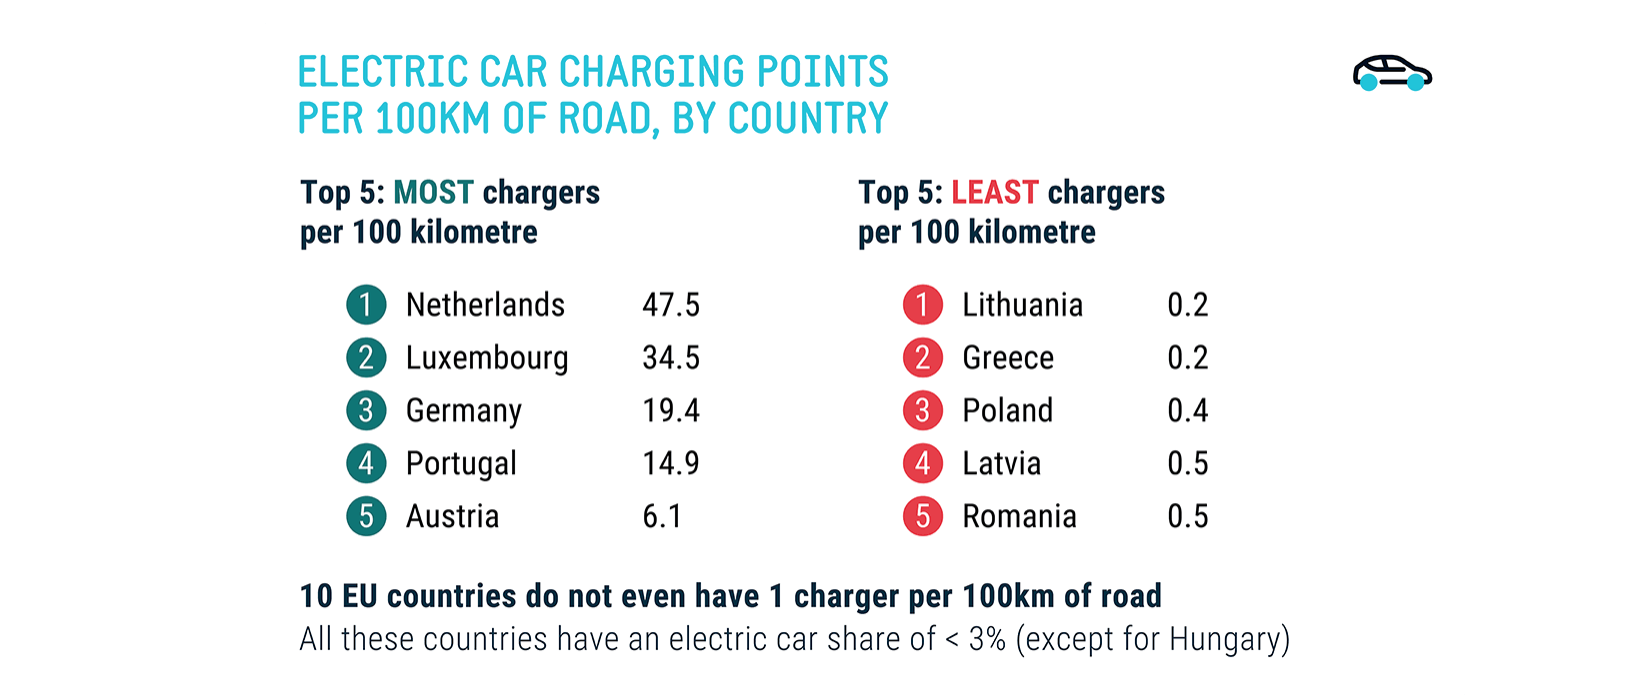 ACEA: ’10 EU countries don’t have a charging point per 100km’